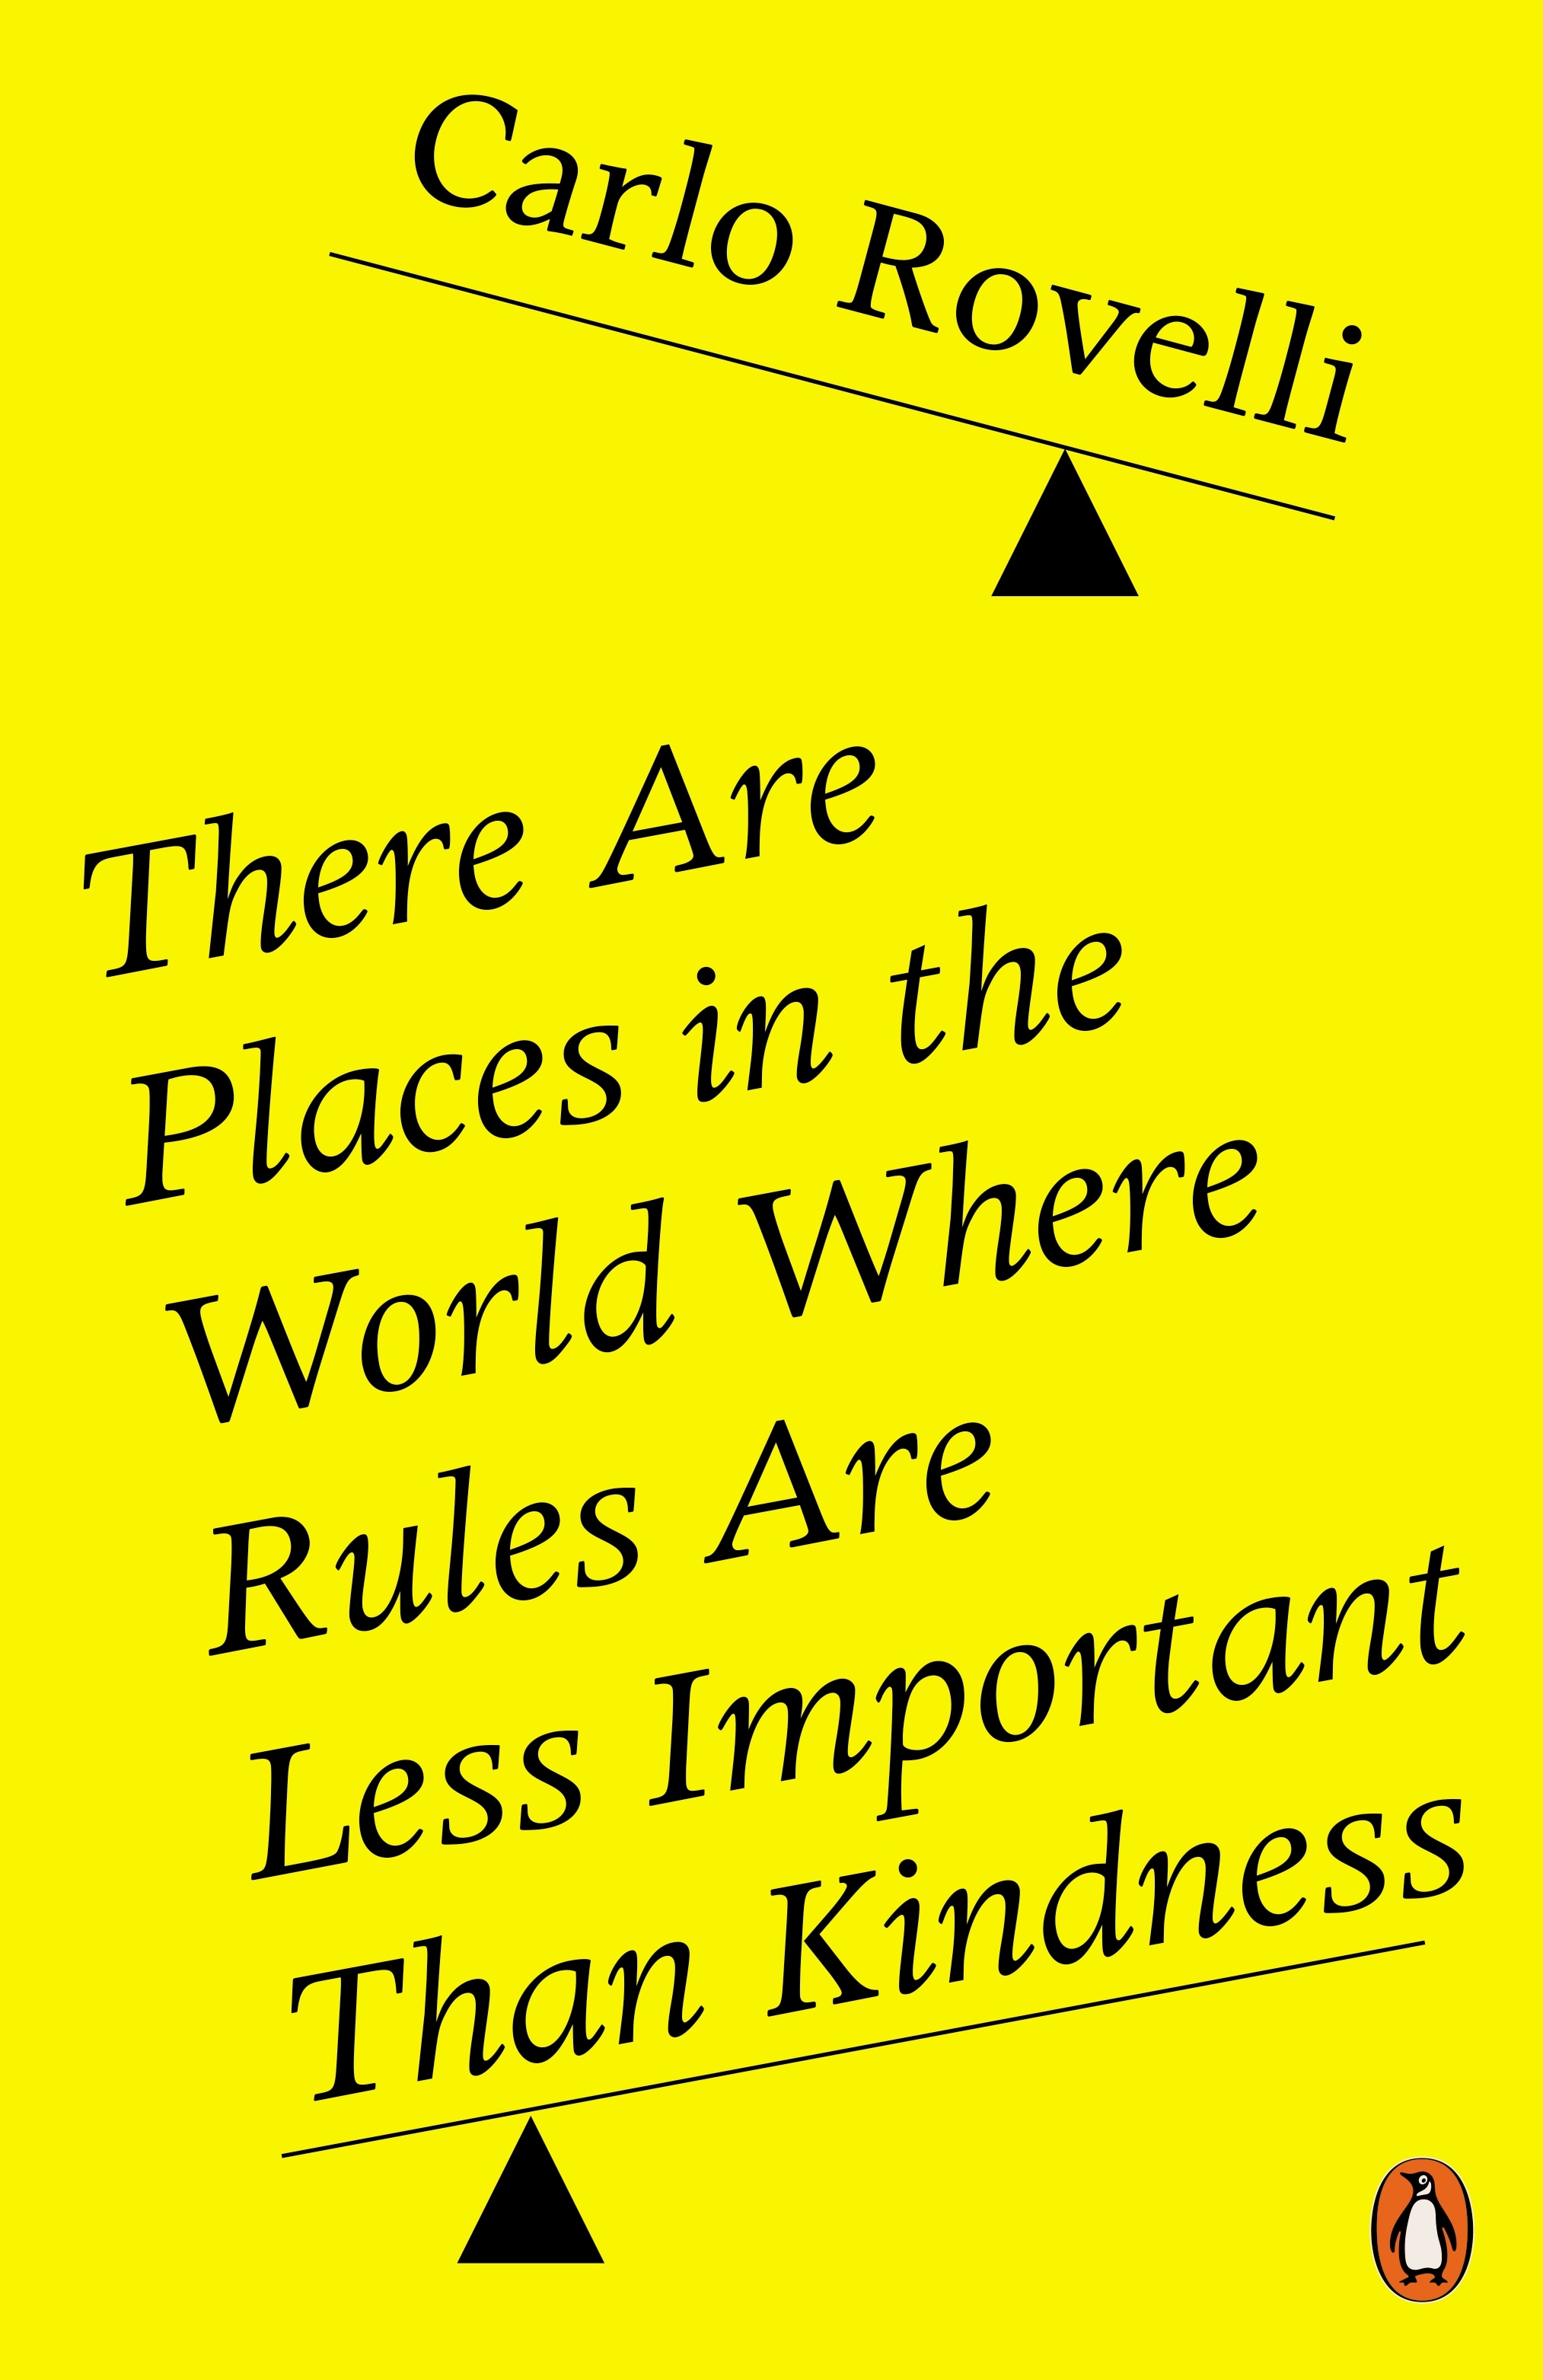 Книга «There Are Places in the World Where Rules Are Less Important Than Kindness» Carlo Rovelli — 1 сентября 2022 г.